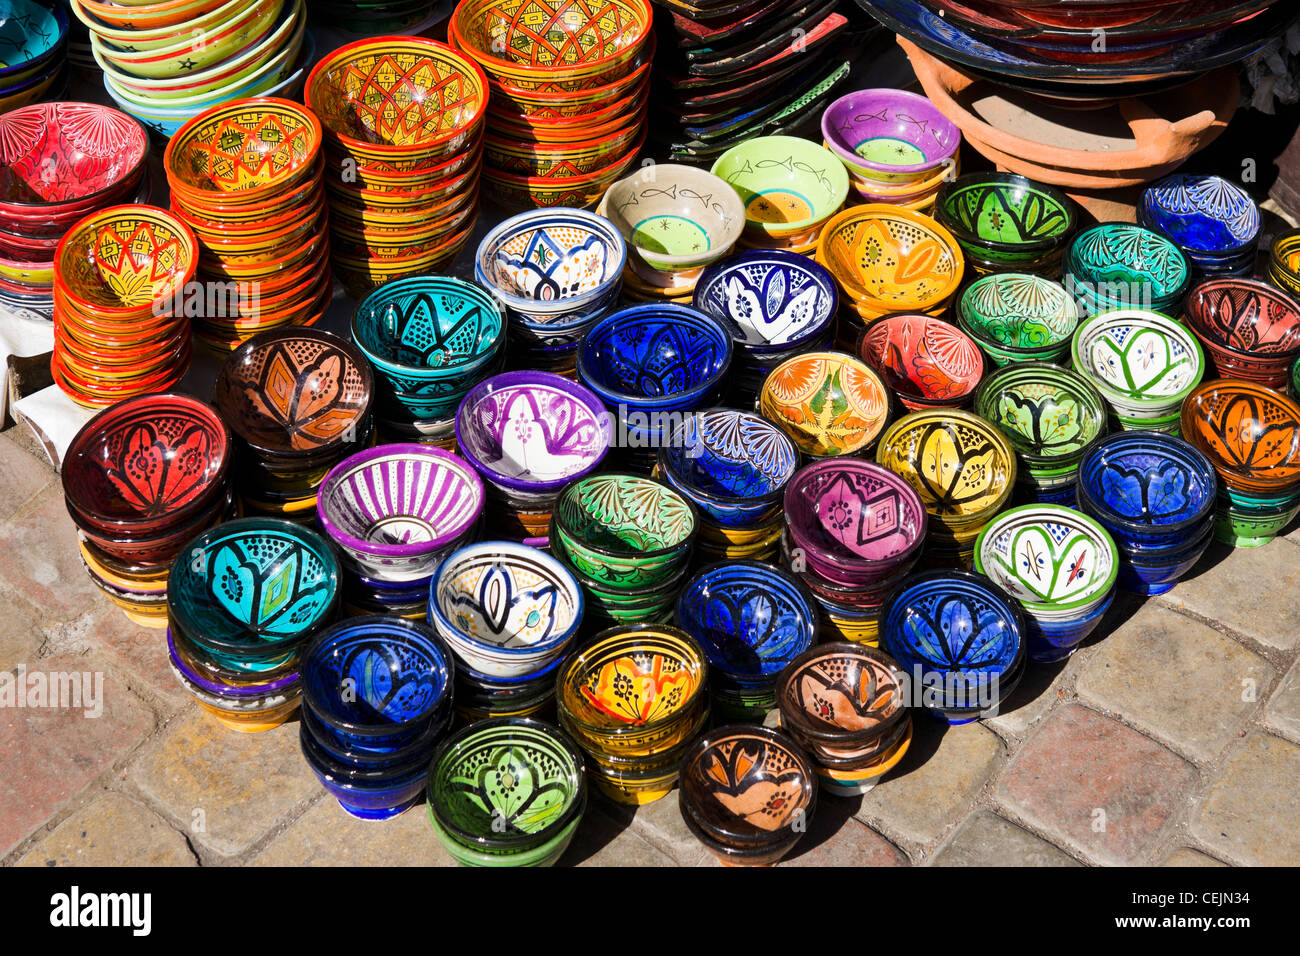 Pottery for sale in the souks, Medina, Marrakech, Morocco, North Africa Stock Photo